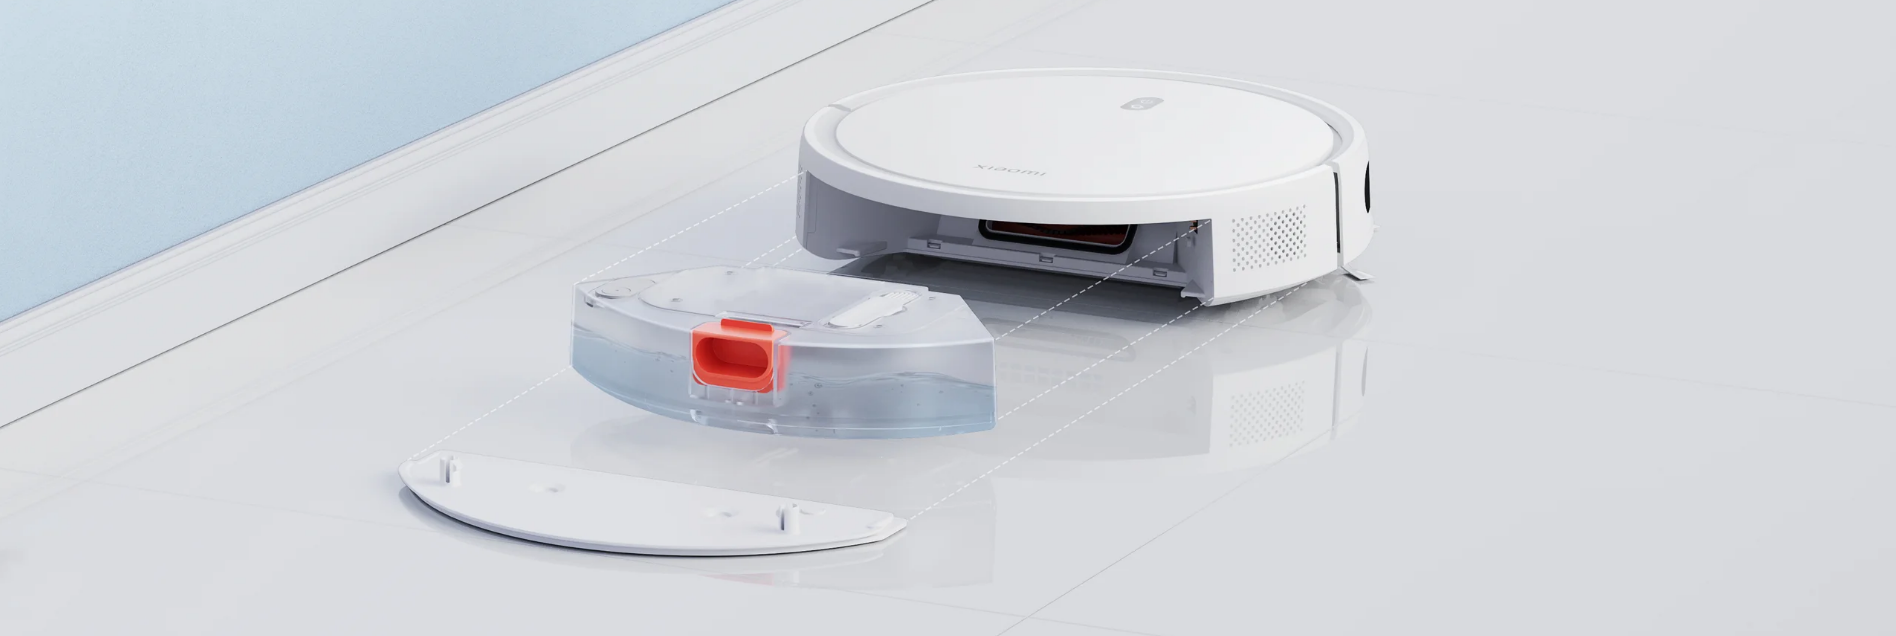 All_new_Xiaomi_Robot_Vacuum_E10_Measured_water_discharge_for_controlled_mopping_sold_by_Technomobi